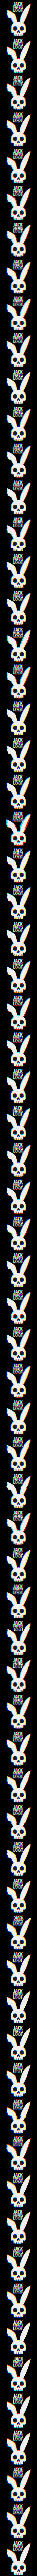 Jack Rabbits Loot collection image